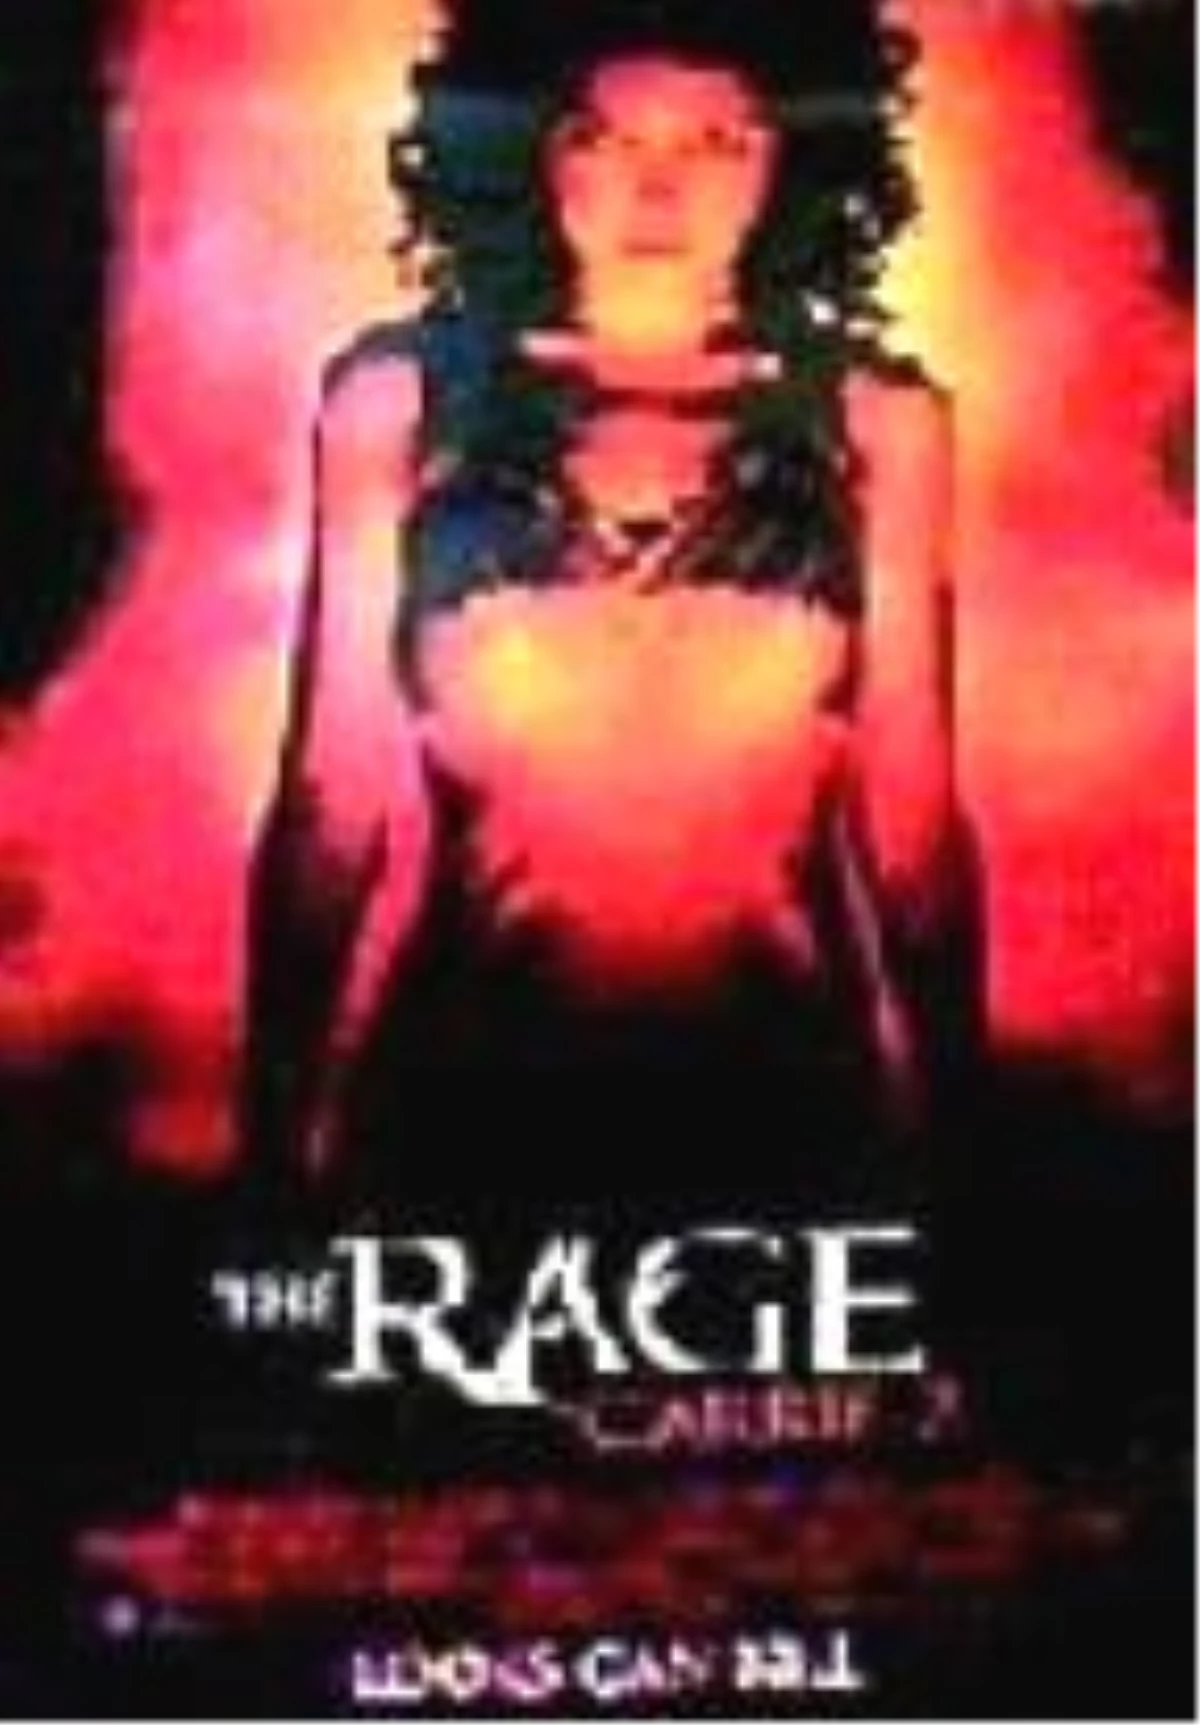 The Rage - Carrie 2 Filmi